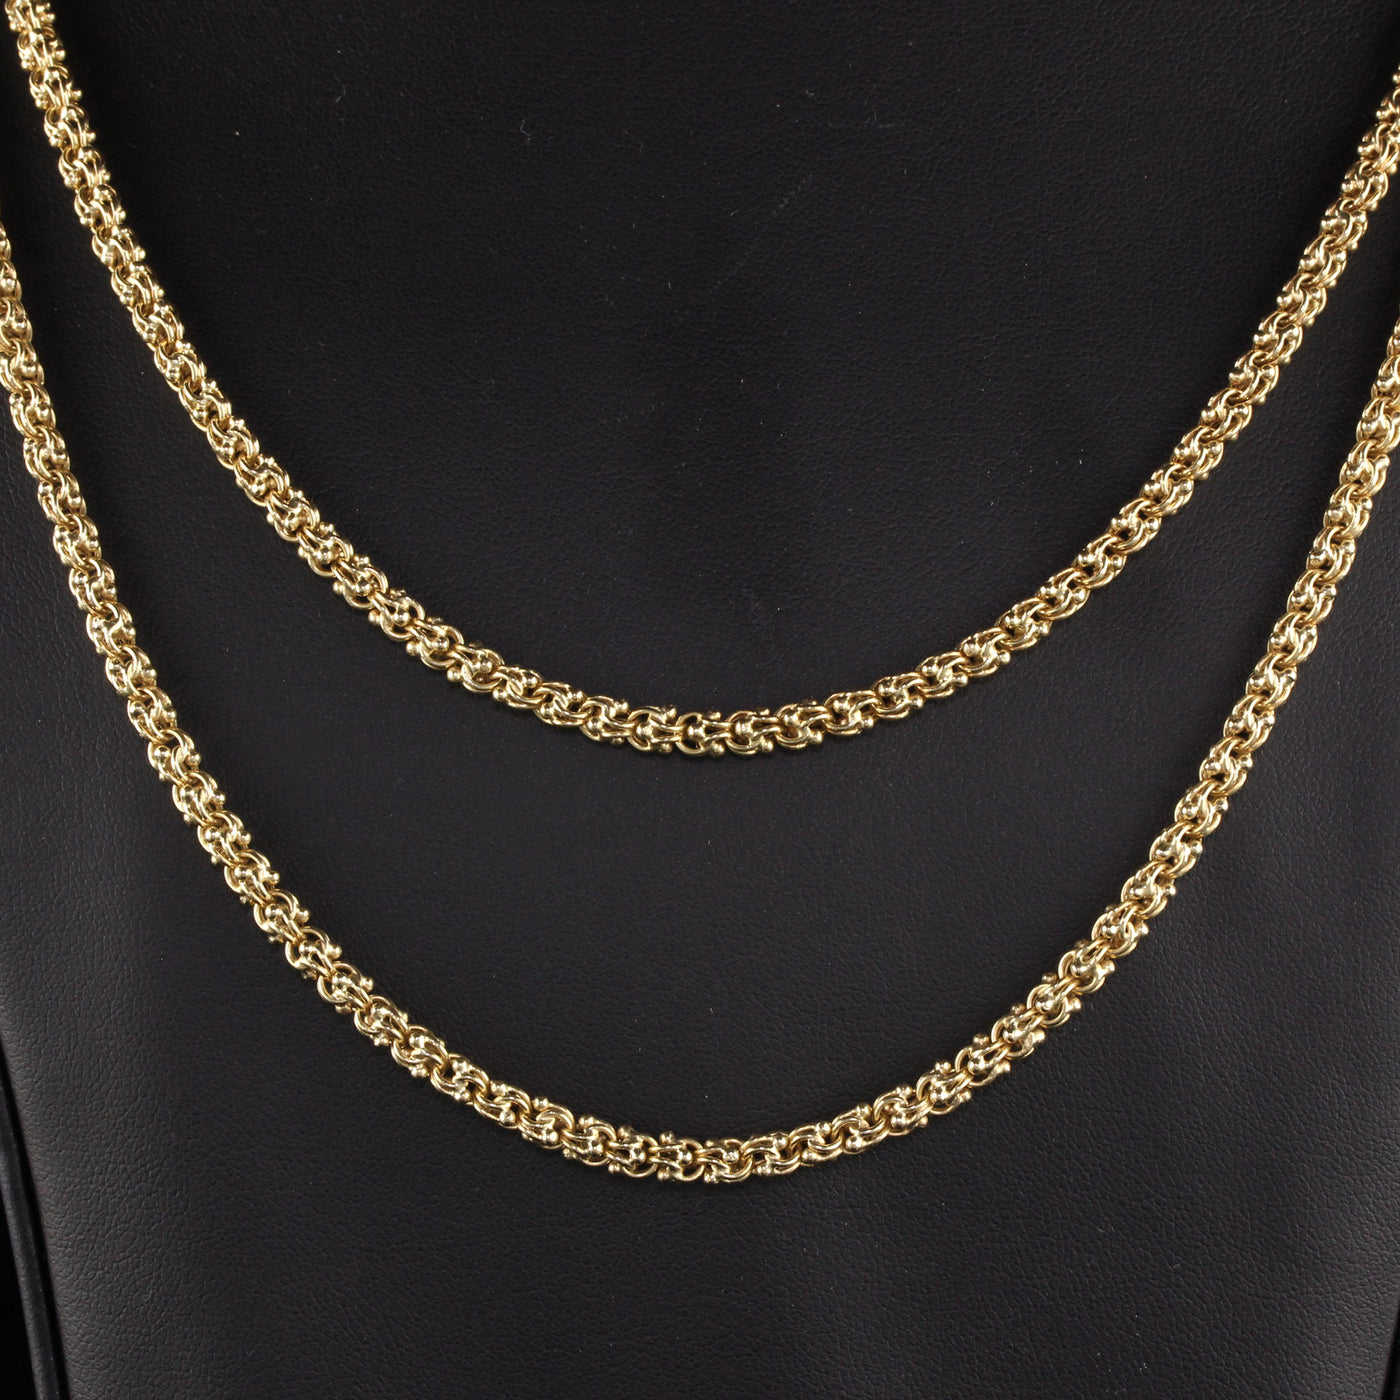 Antique Art Deco 15K Yellow Gold Intricate Link Chain - 61 Inches